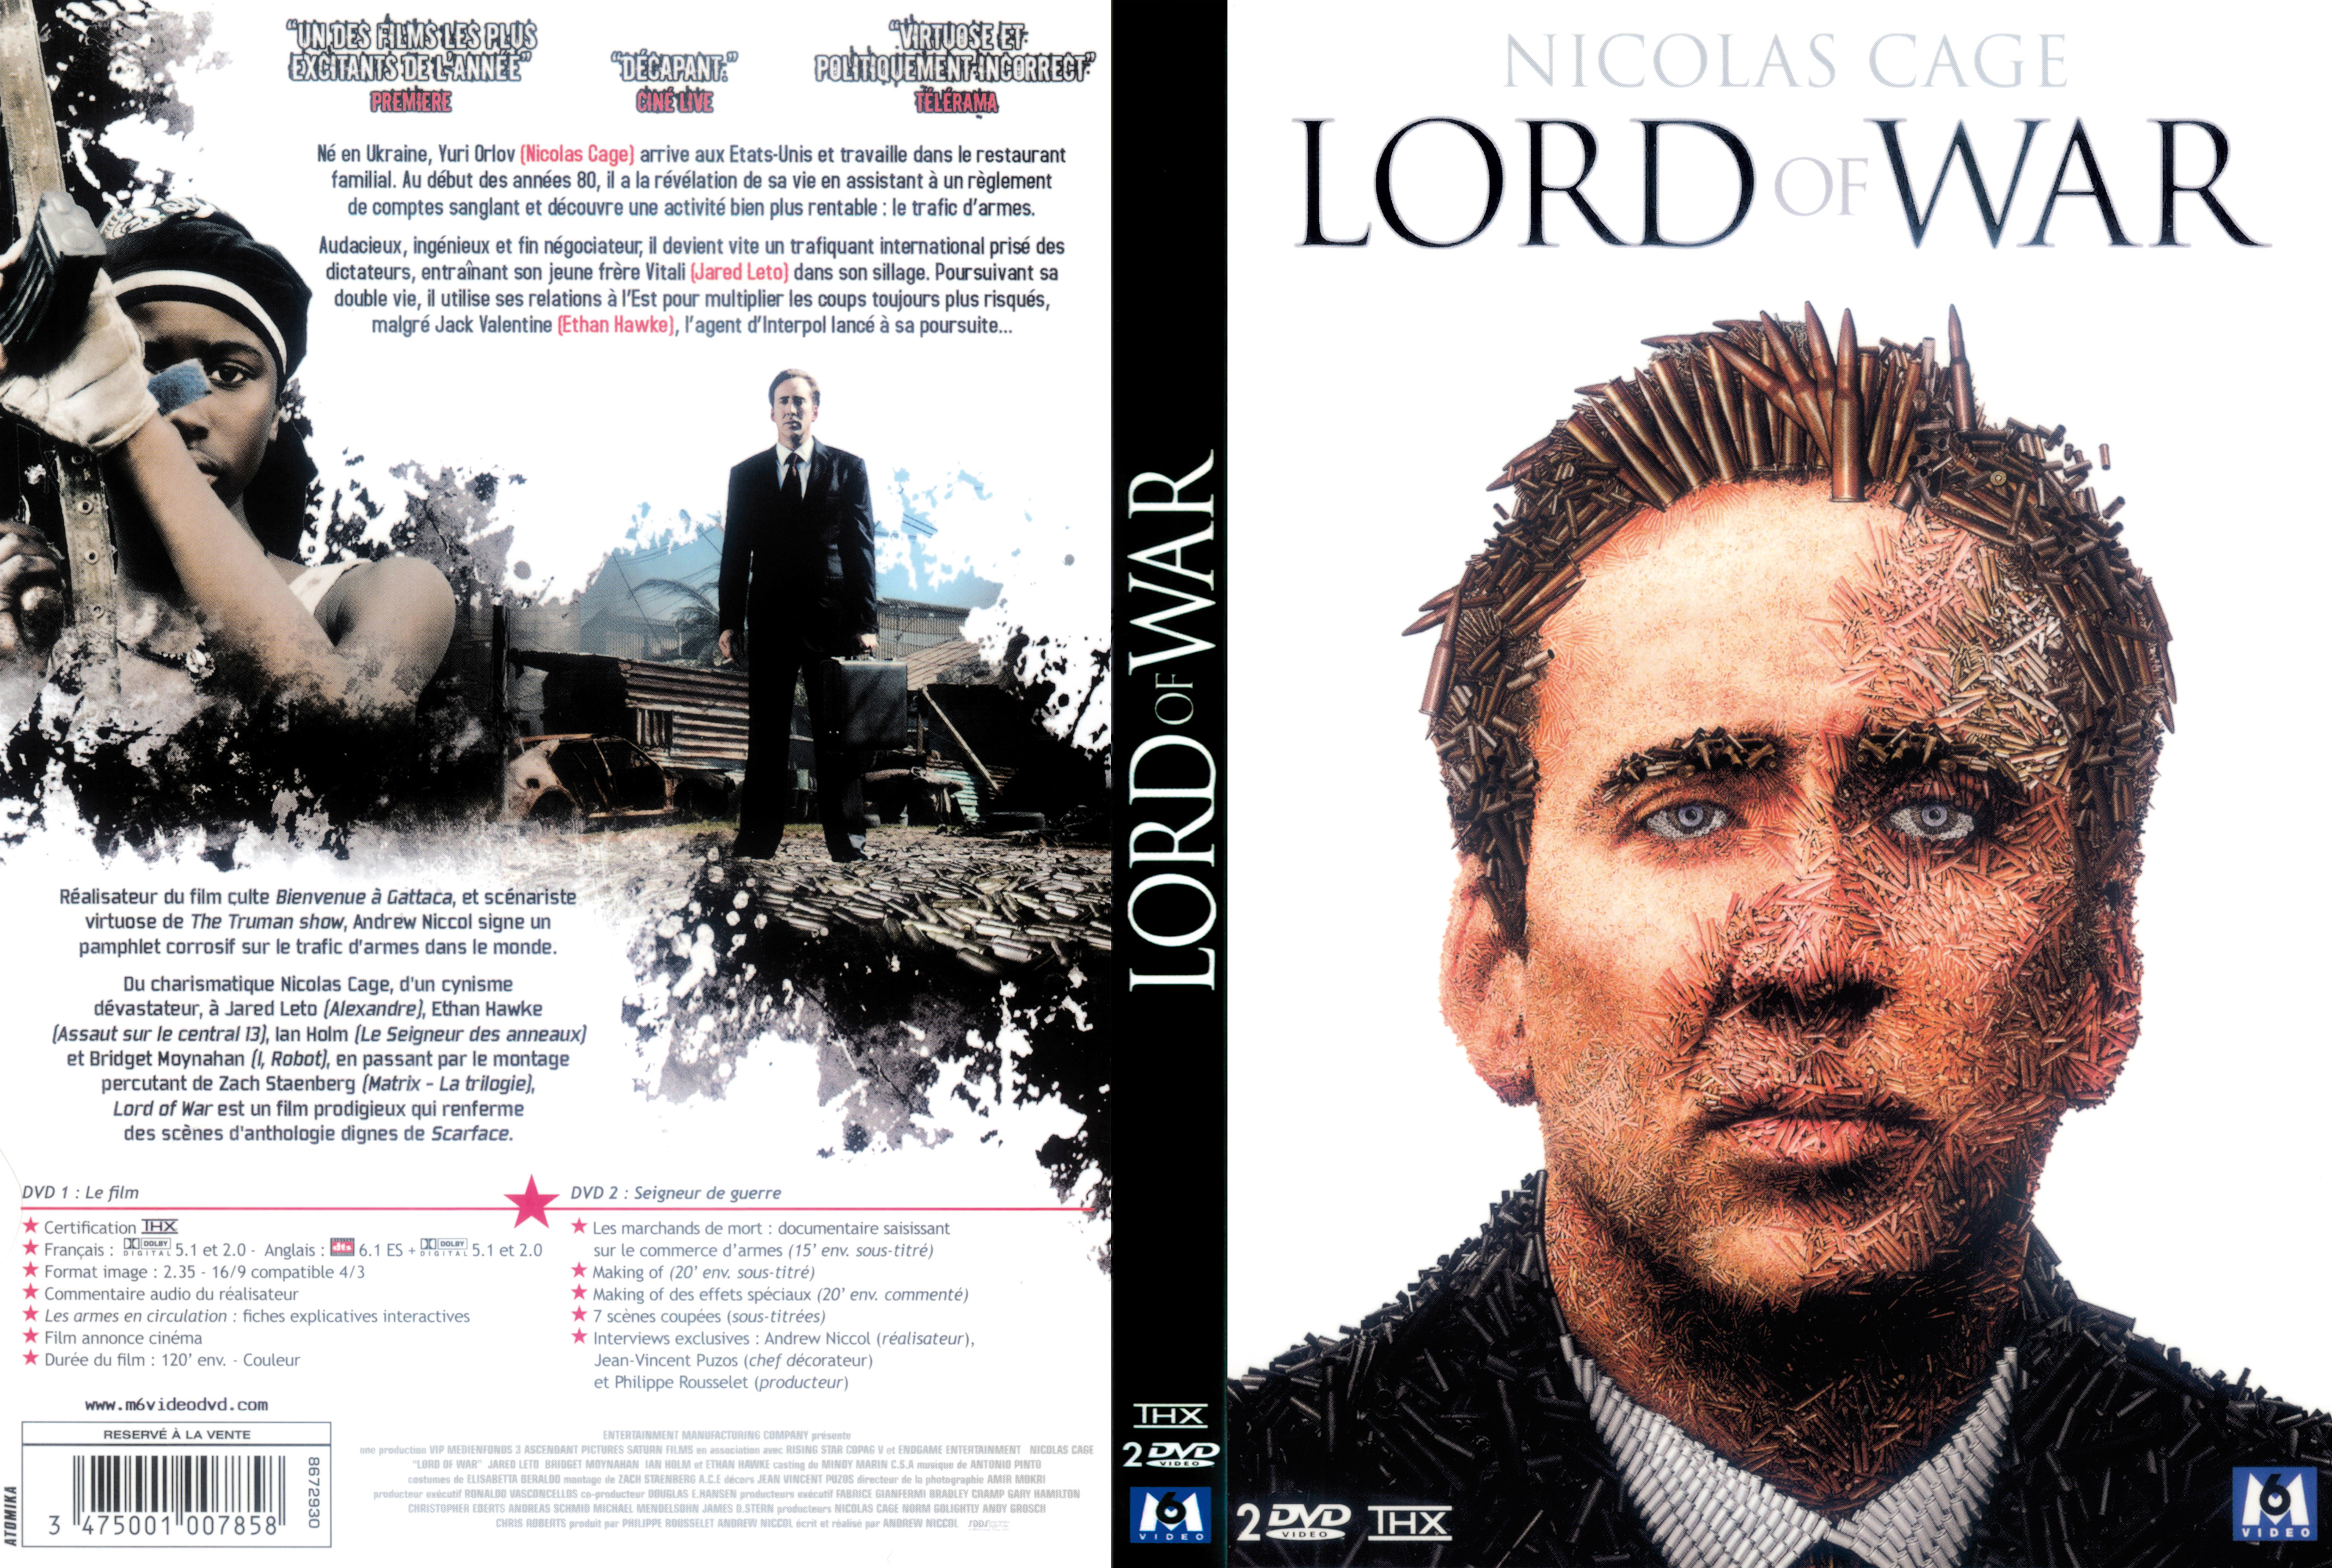 Jaquette DVD Lord of war v2